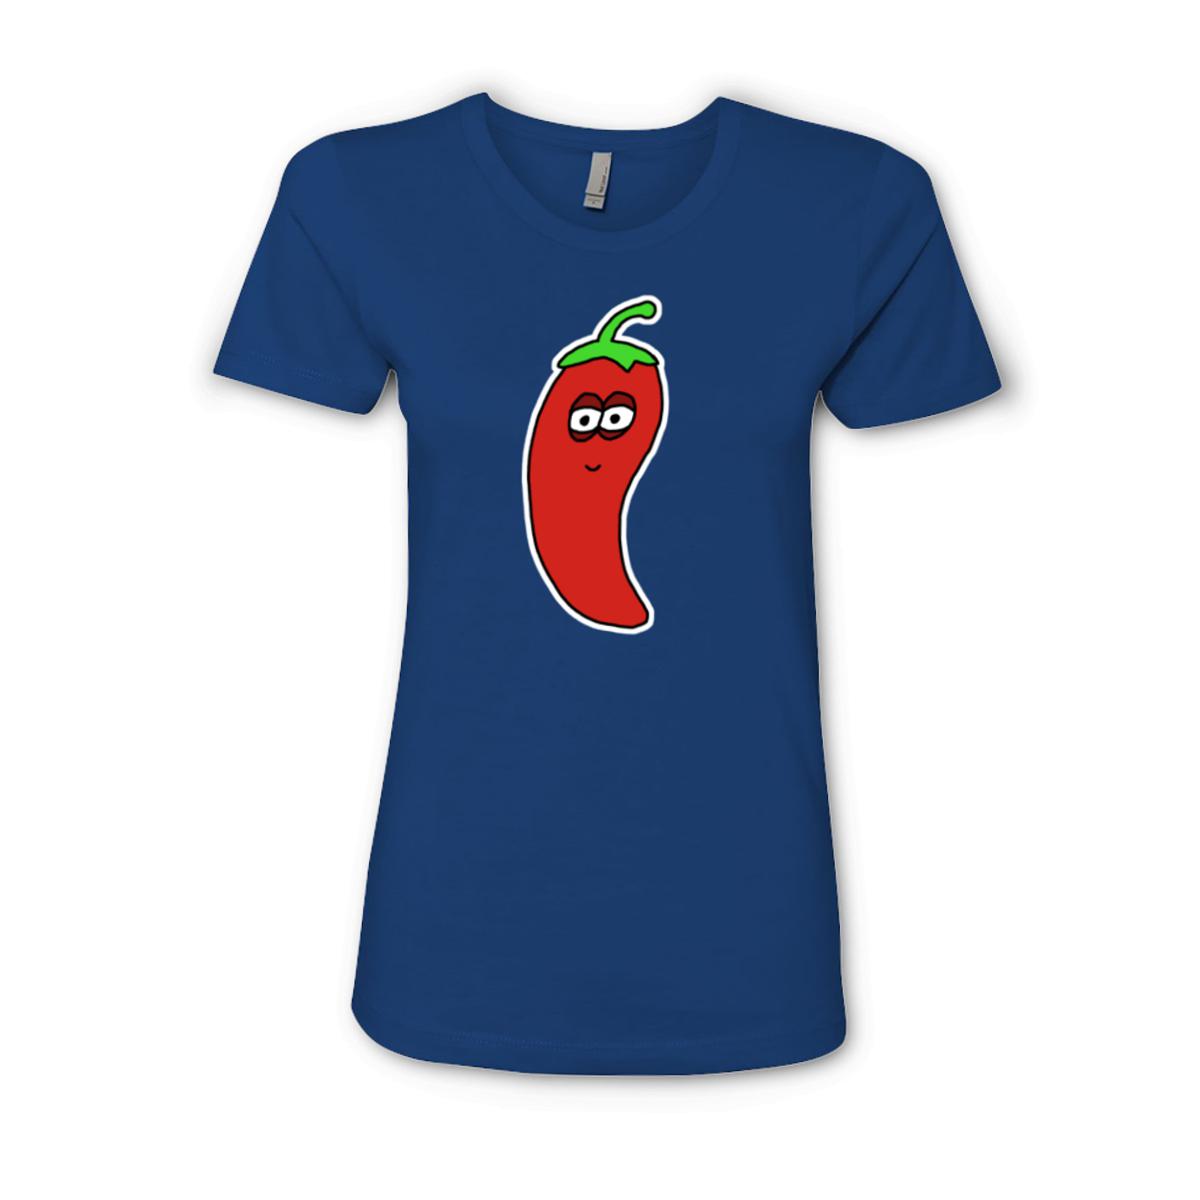 Chili Pepper Ladies' Boyfriend Tee Double Extra Large royal-blue